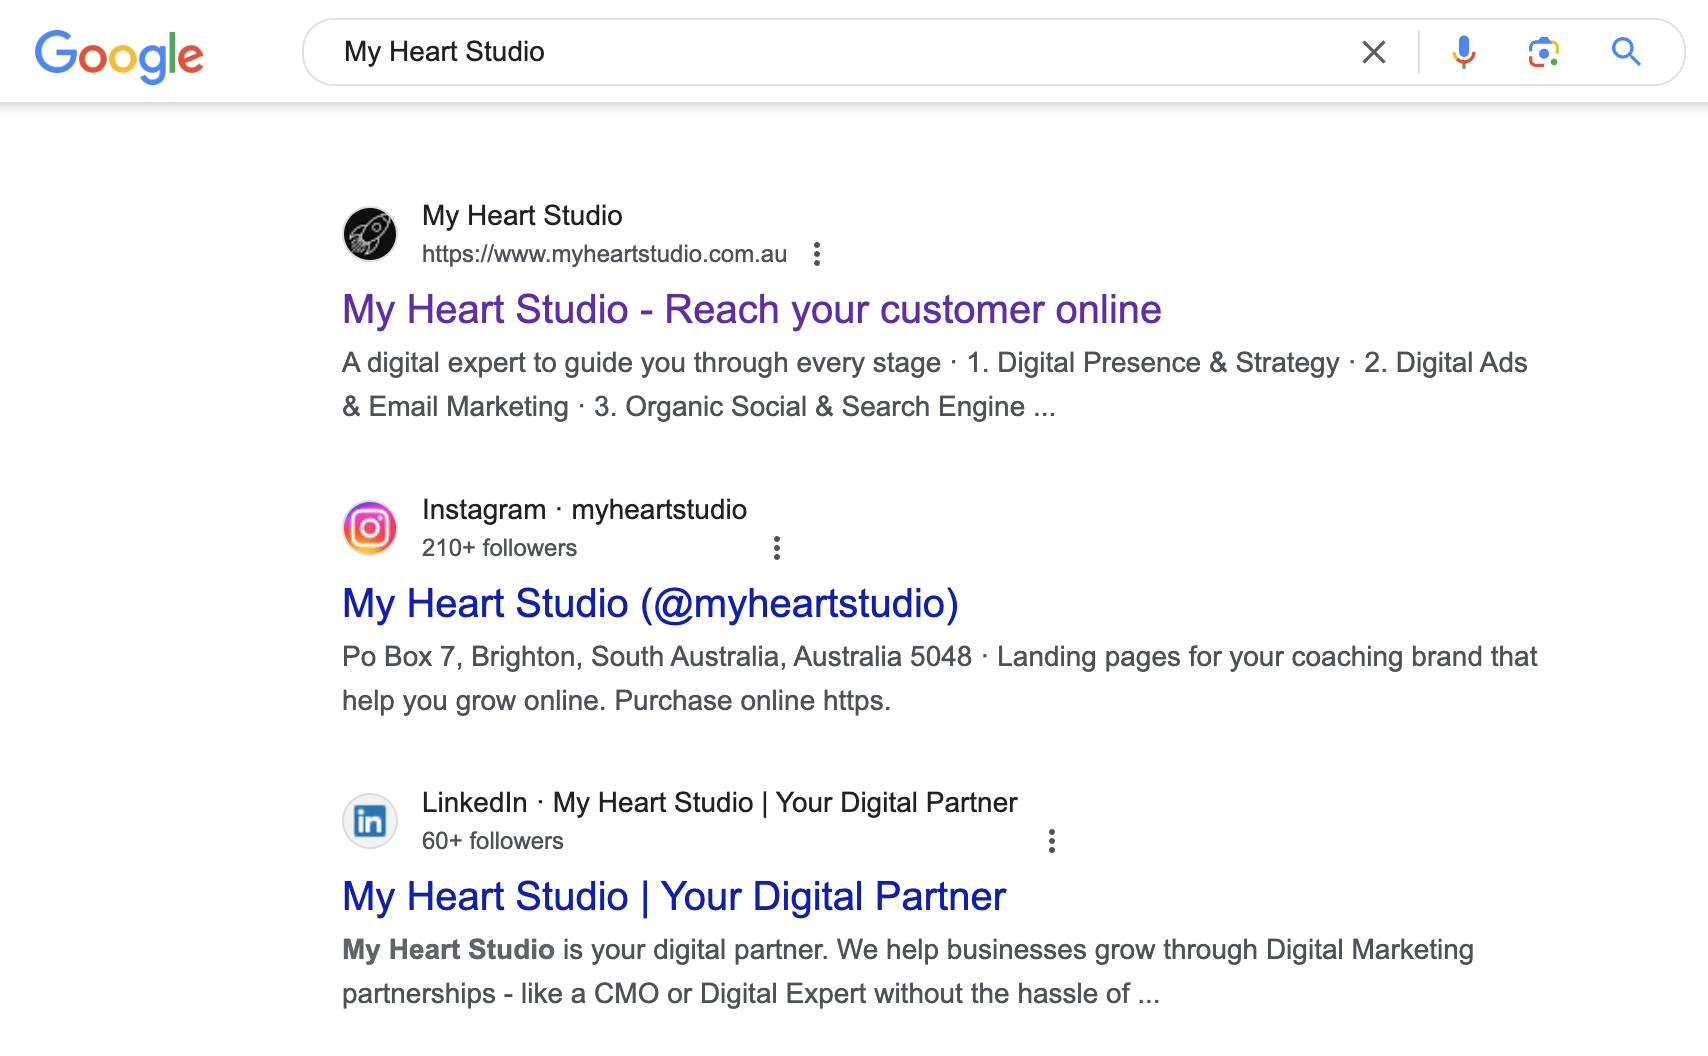 My Heart Studio Google Search Engine Optimisation (SEO) results and Local SEO results